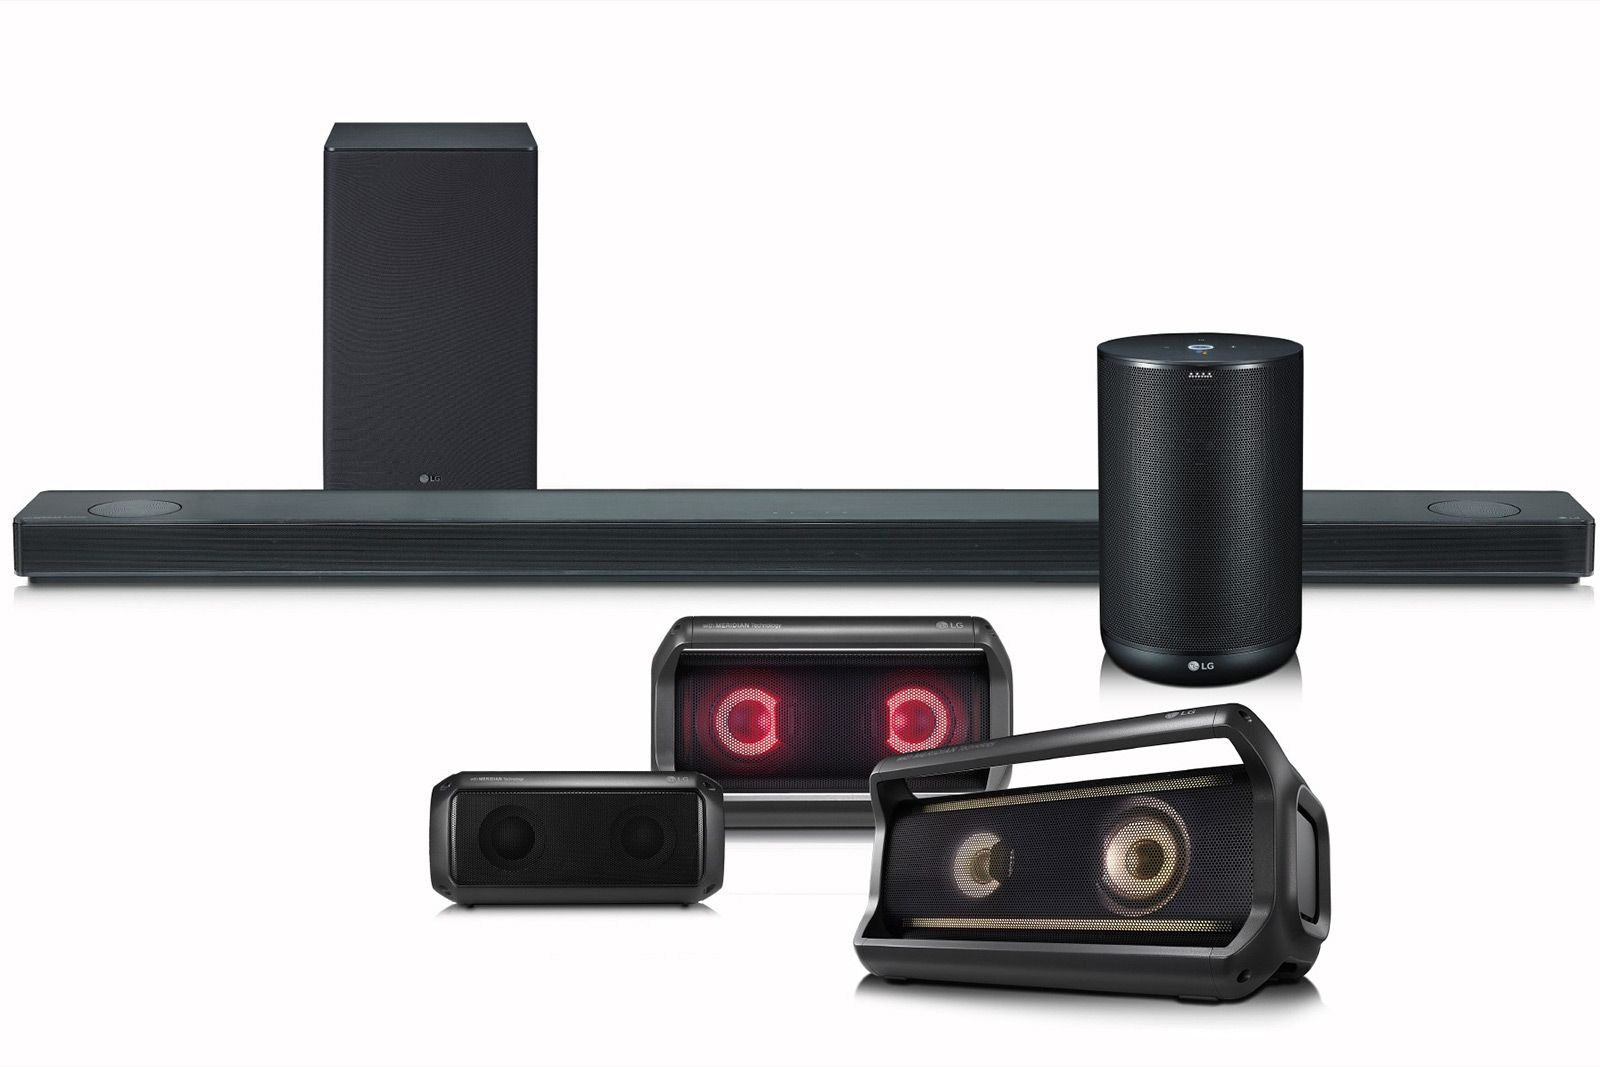 LG reveals 2018 audio products, Dolby Atmos soundbar and Assistant speaker